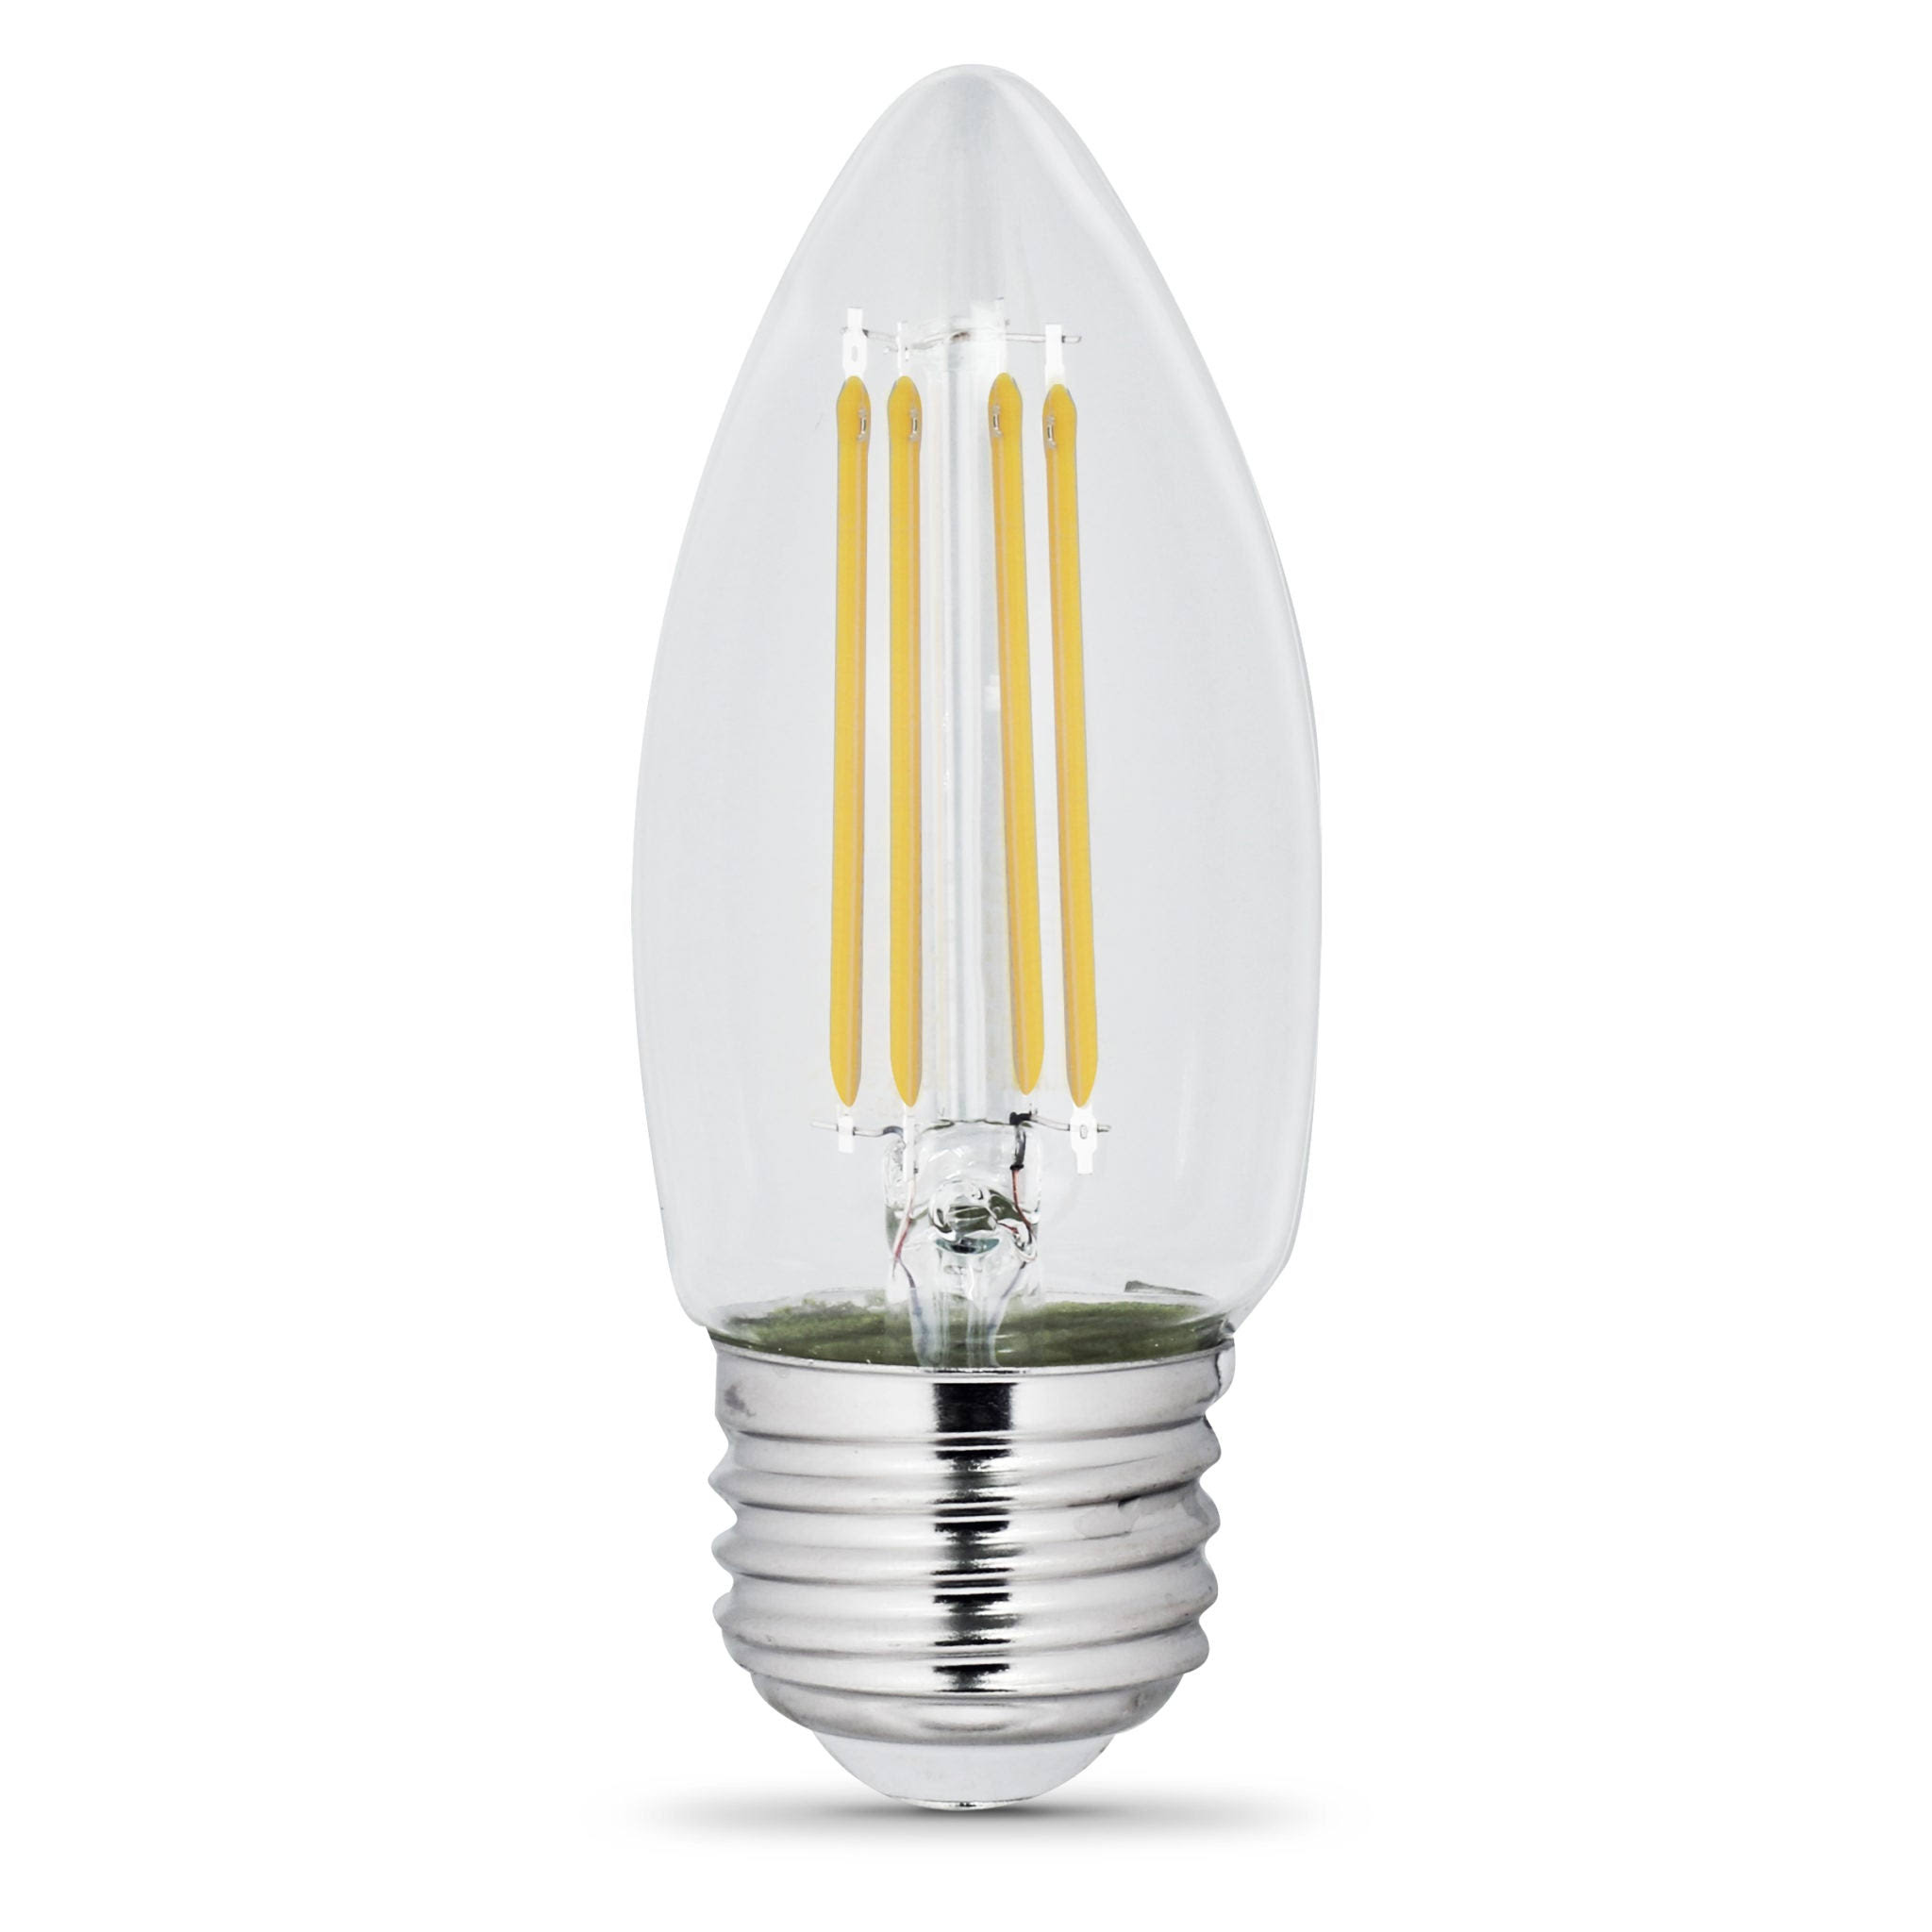 Feit Electric Dimmable Filament Led Light Bulb - Clear, 60 Watts